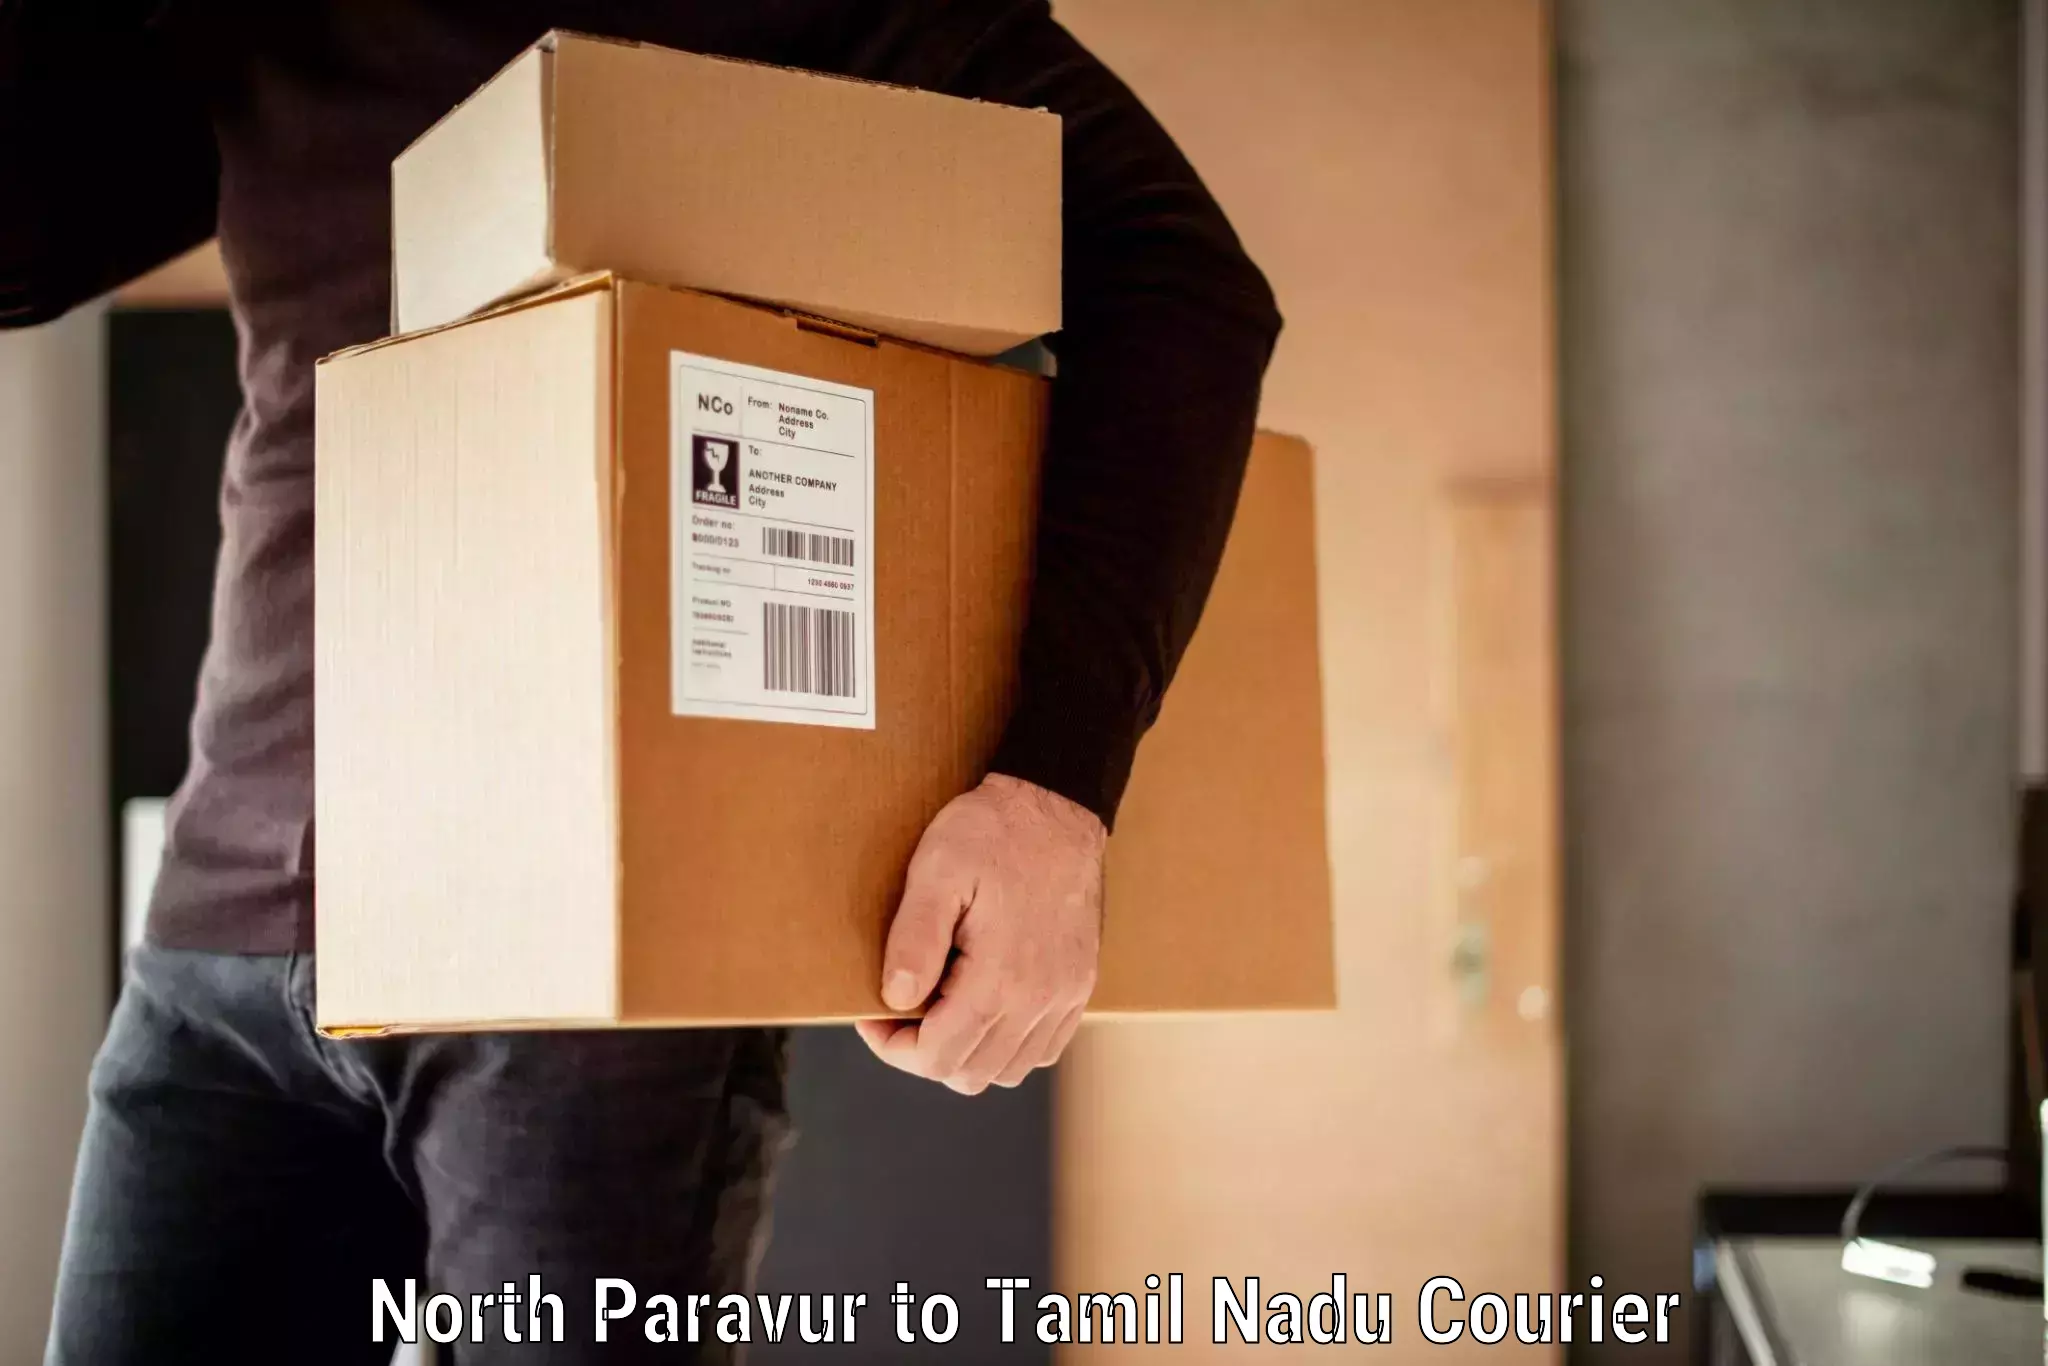 Luggage transport company North Paravur to Vriddhachalam